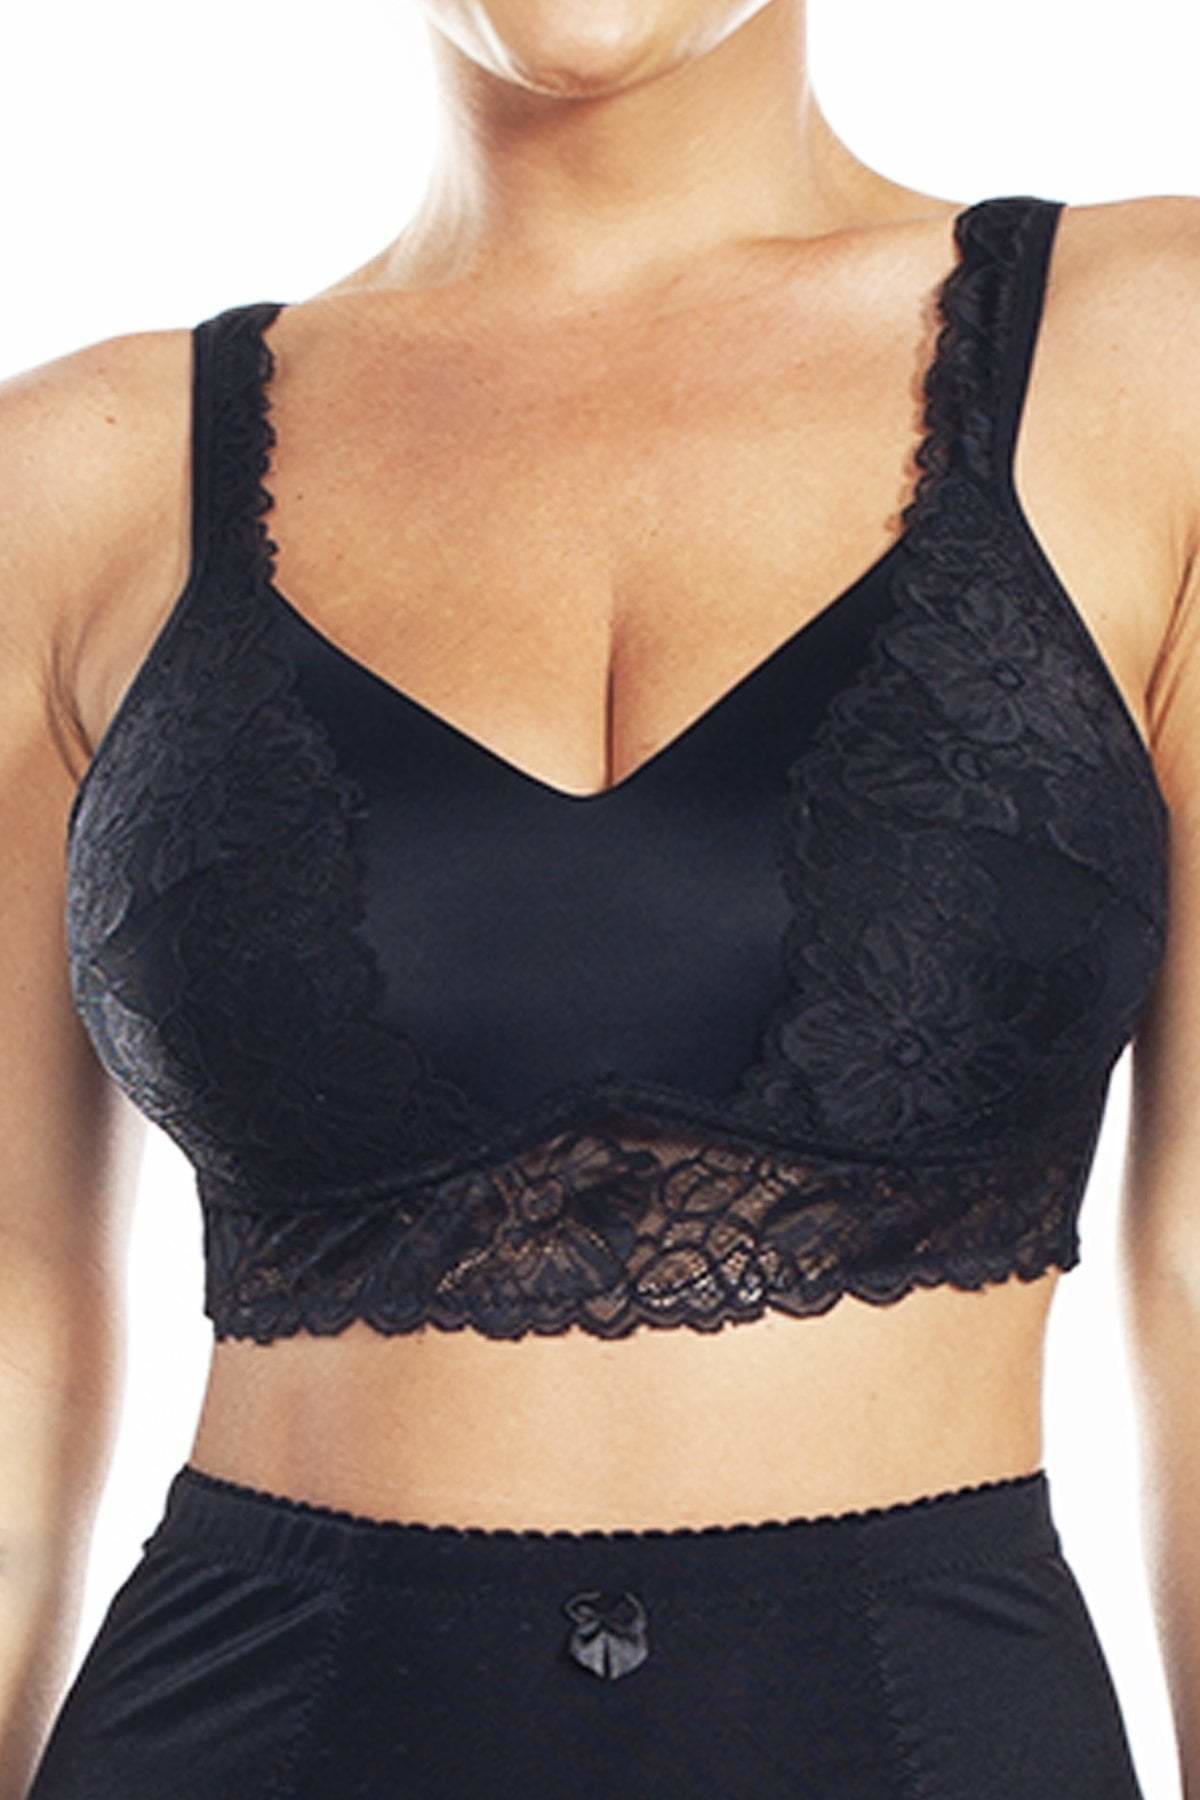 Image of Molded Cup Bra with Lace Detail